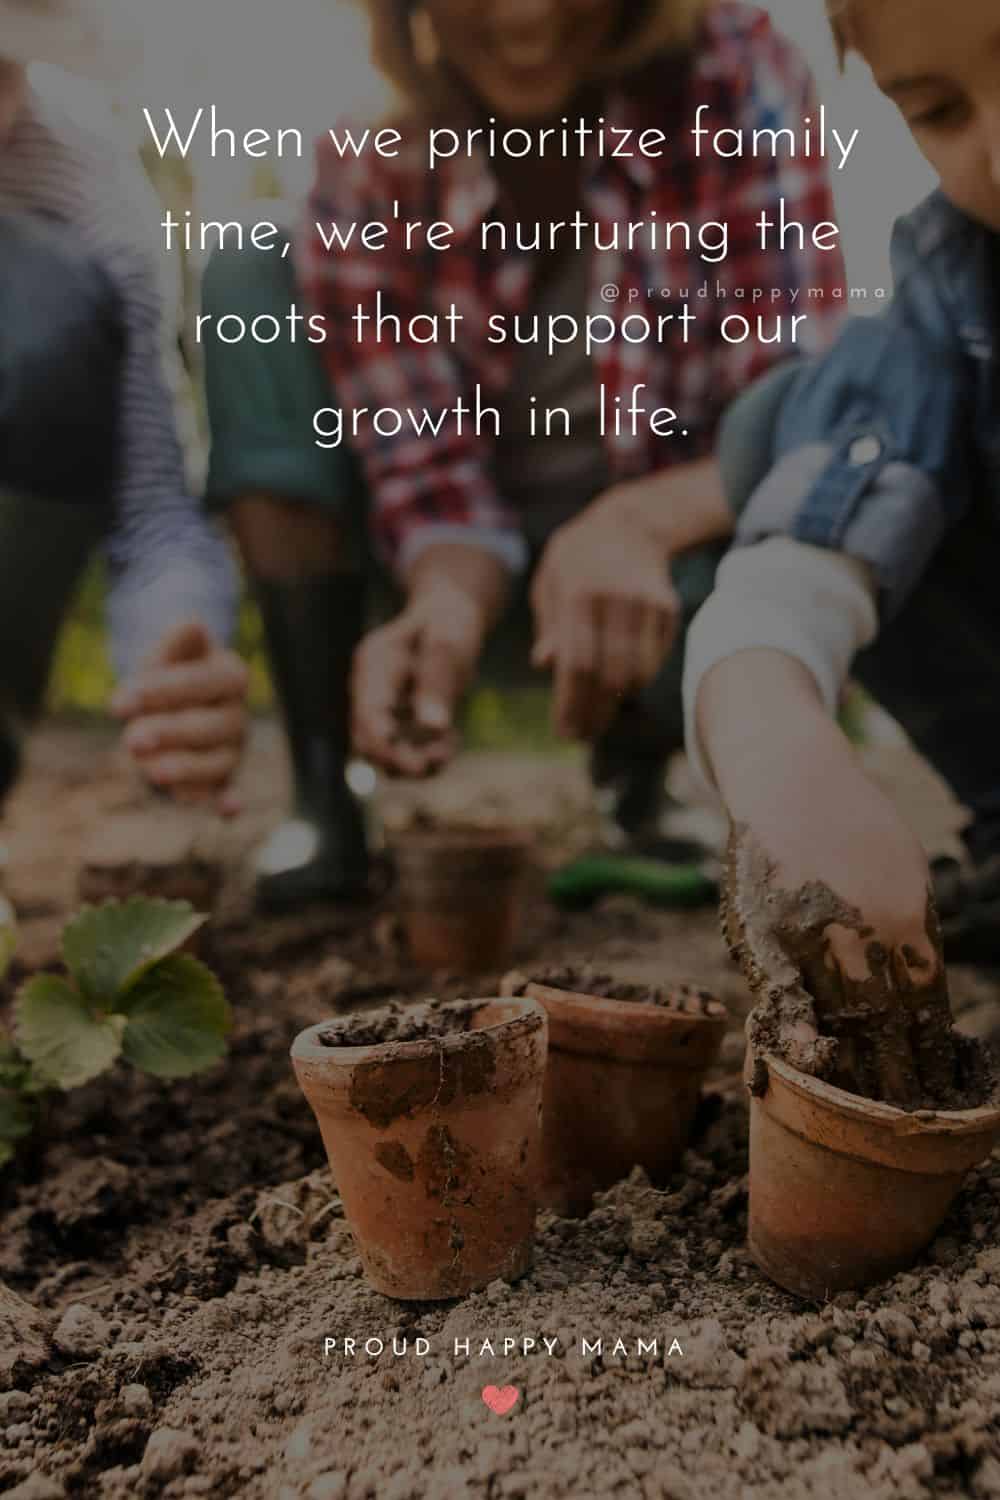 time with family quotes - When we prioritize family time, we're nurturing the roots that support our growth in life.